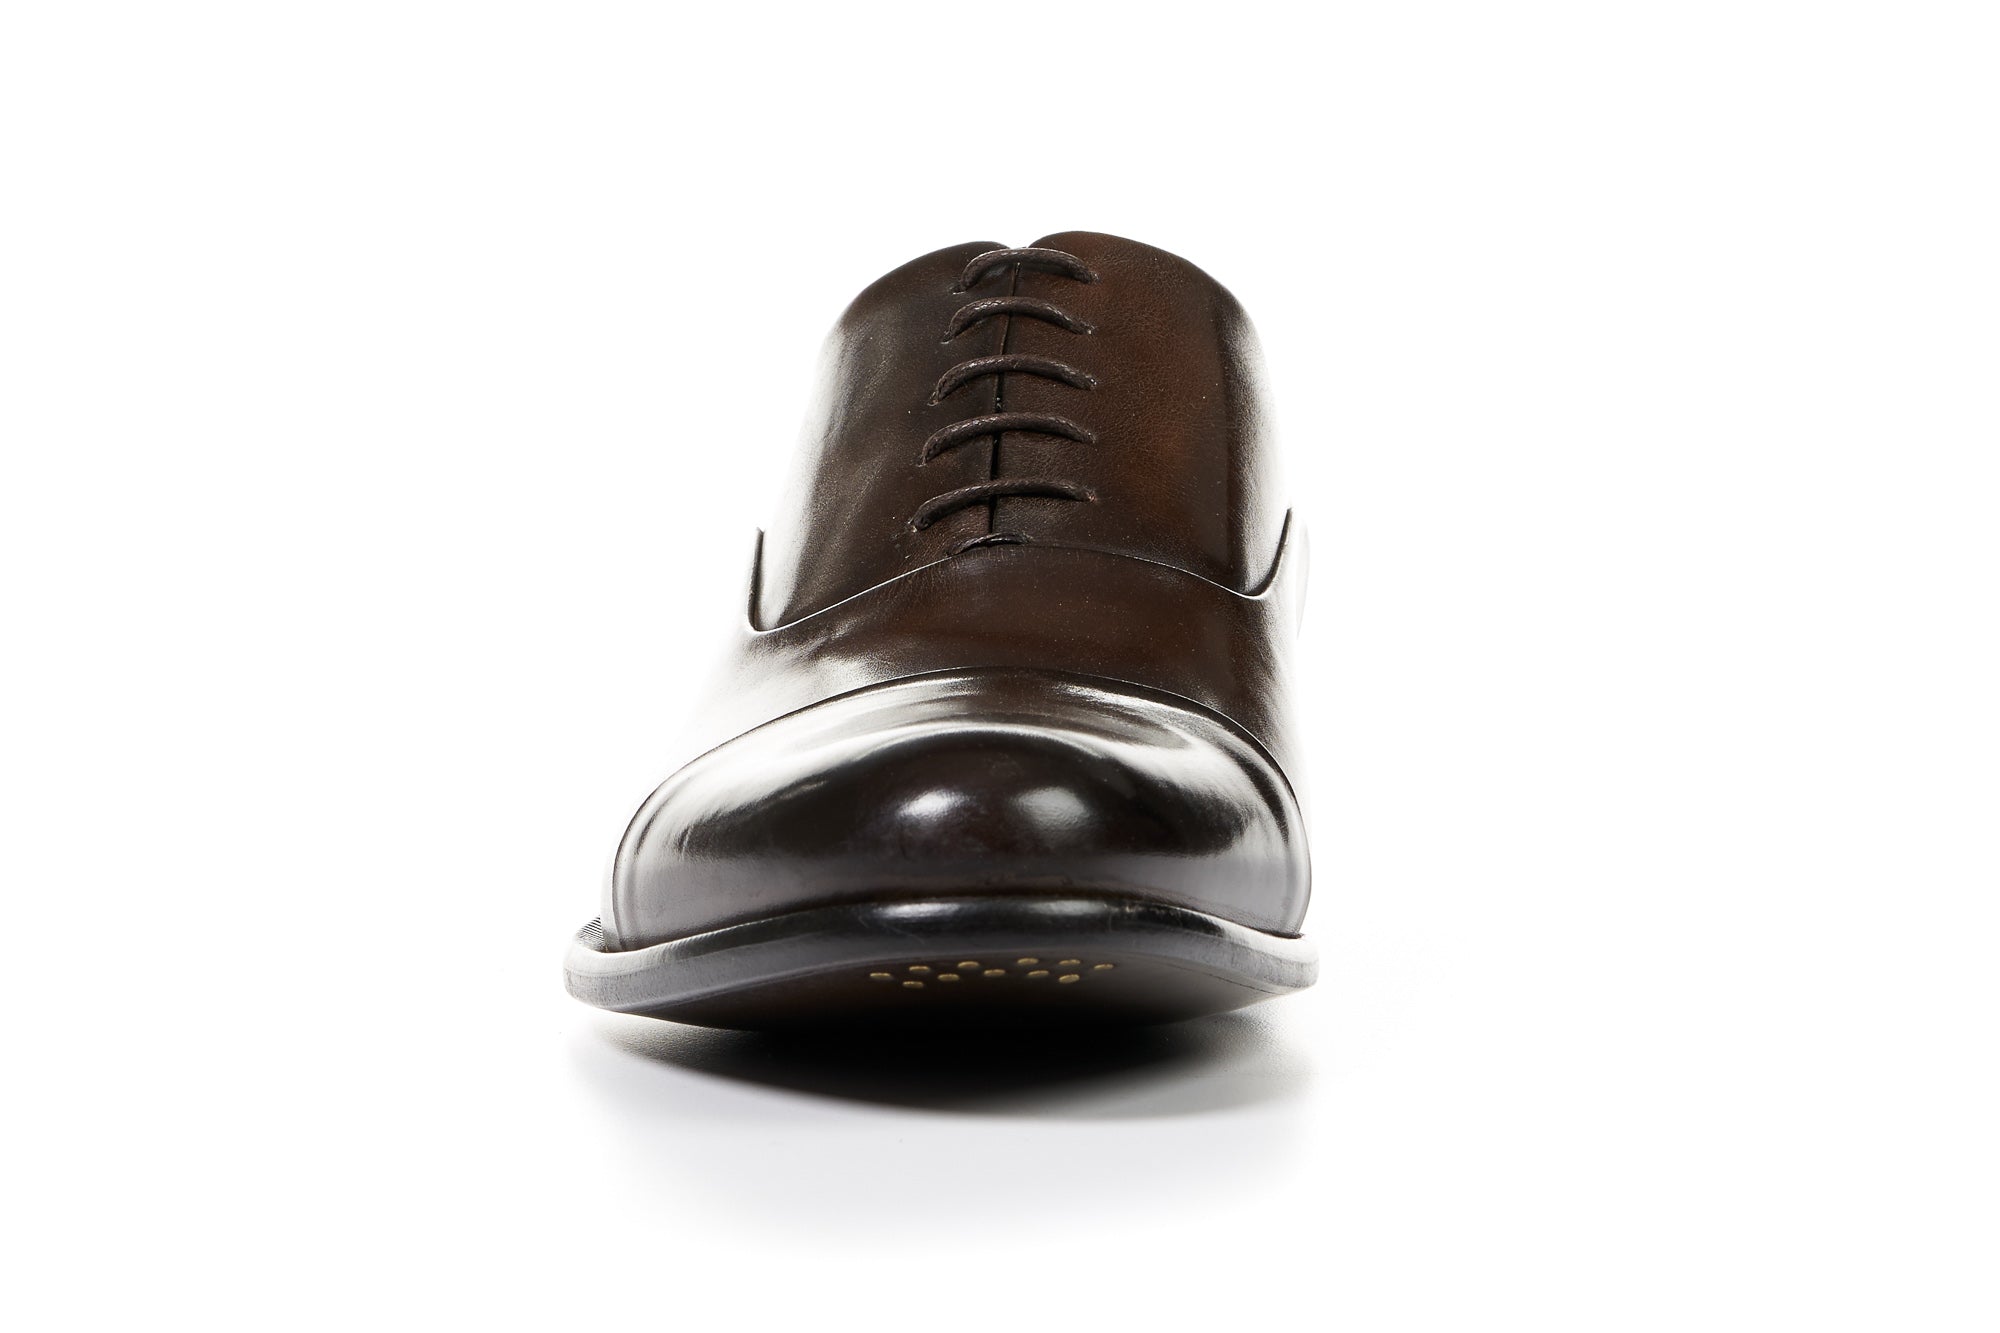 The Cagney Cap-Toe Oxford - Chocolate